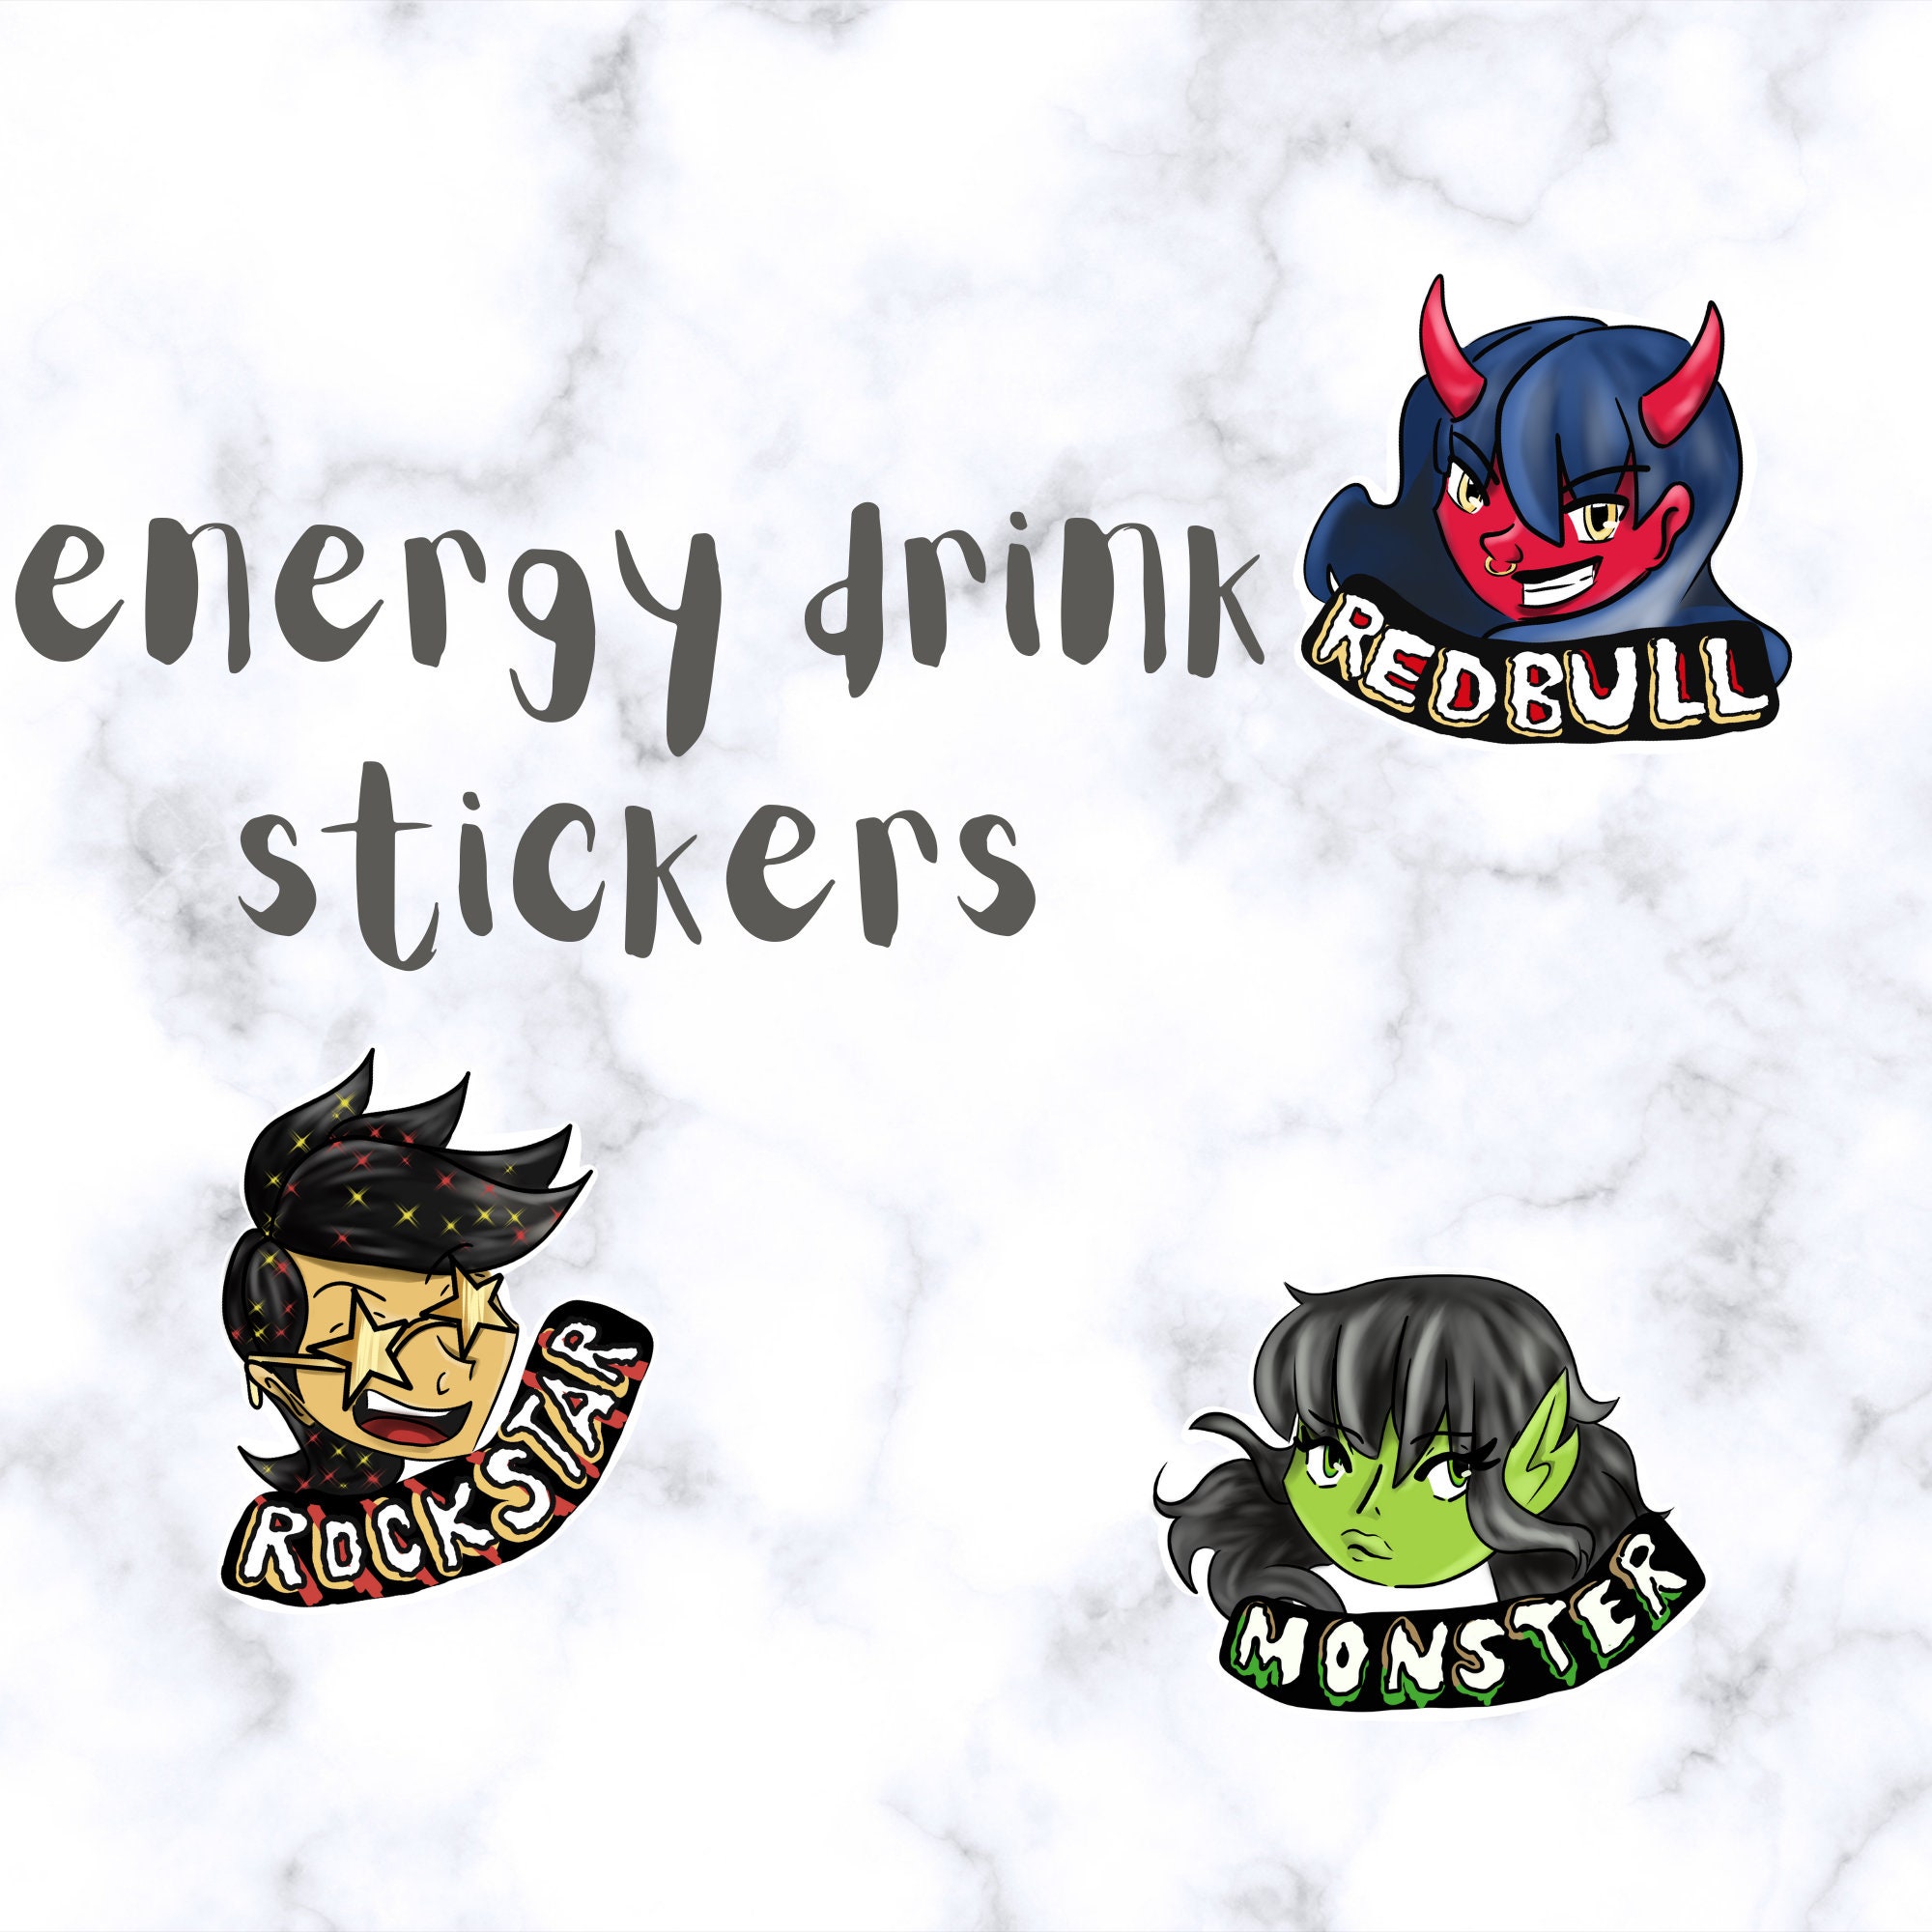 Planche stickers Monster Energy XL